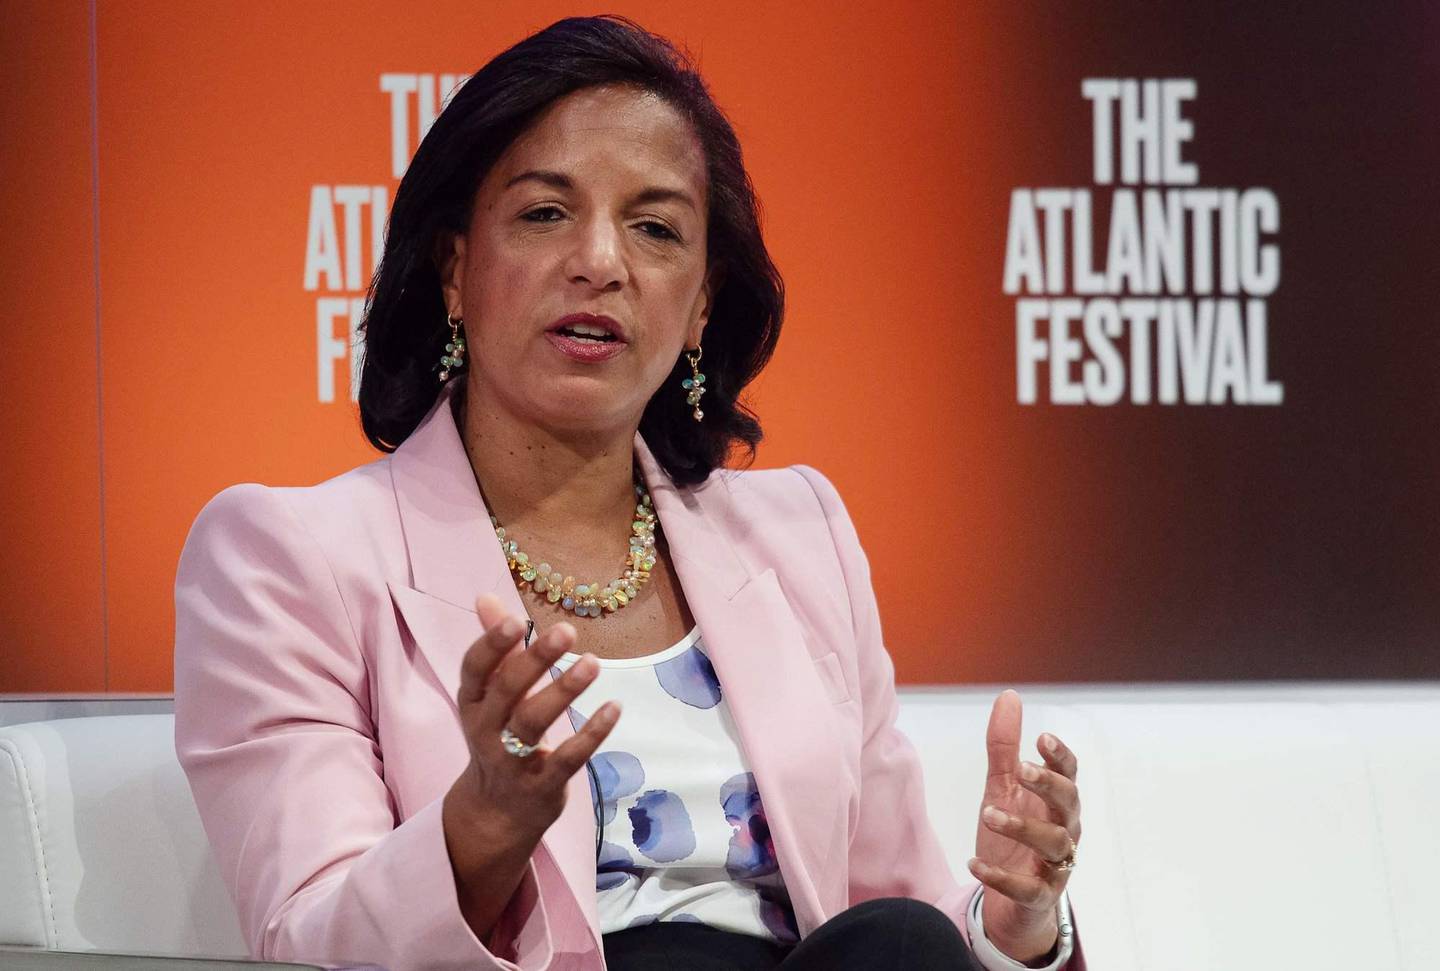 Former National Security Advisor Susan Rice speaks at the Atlantic Festival in Washington, DC, on September 25, 2019. (Photo by NICHOLAS KAMM / AFP)